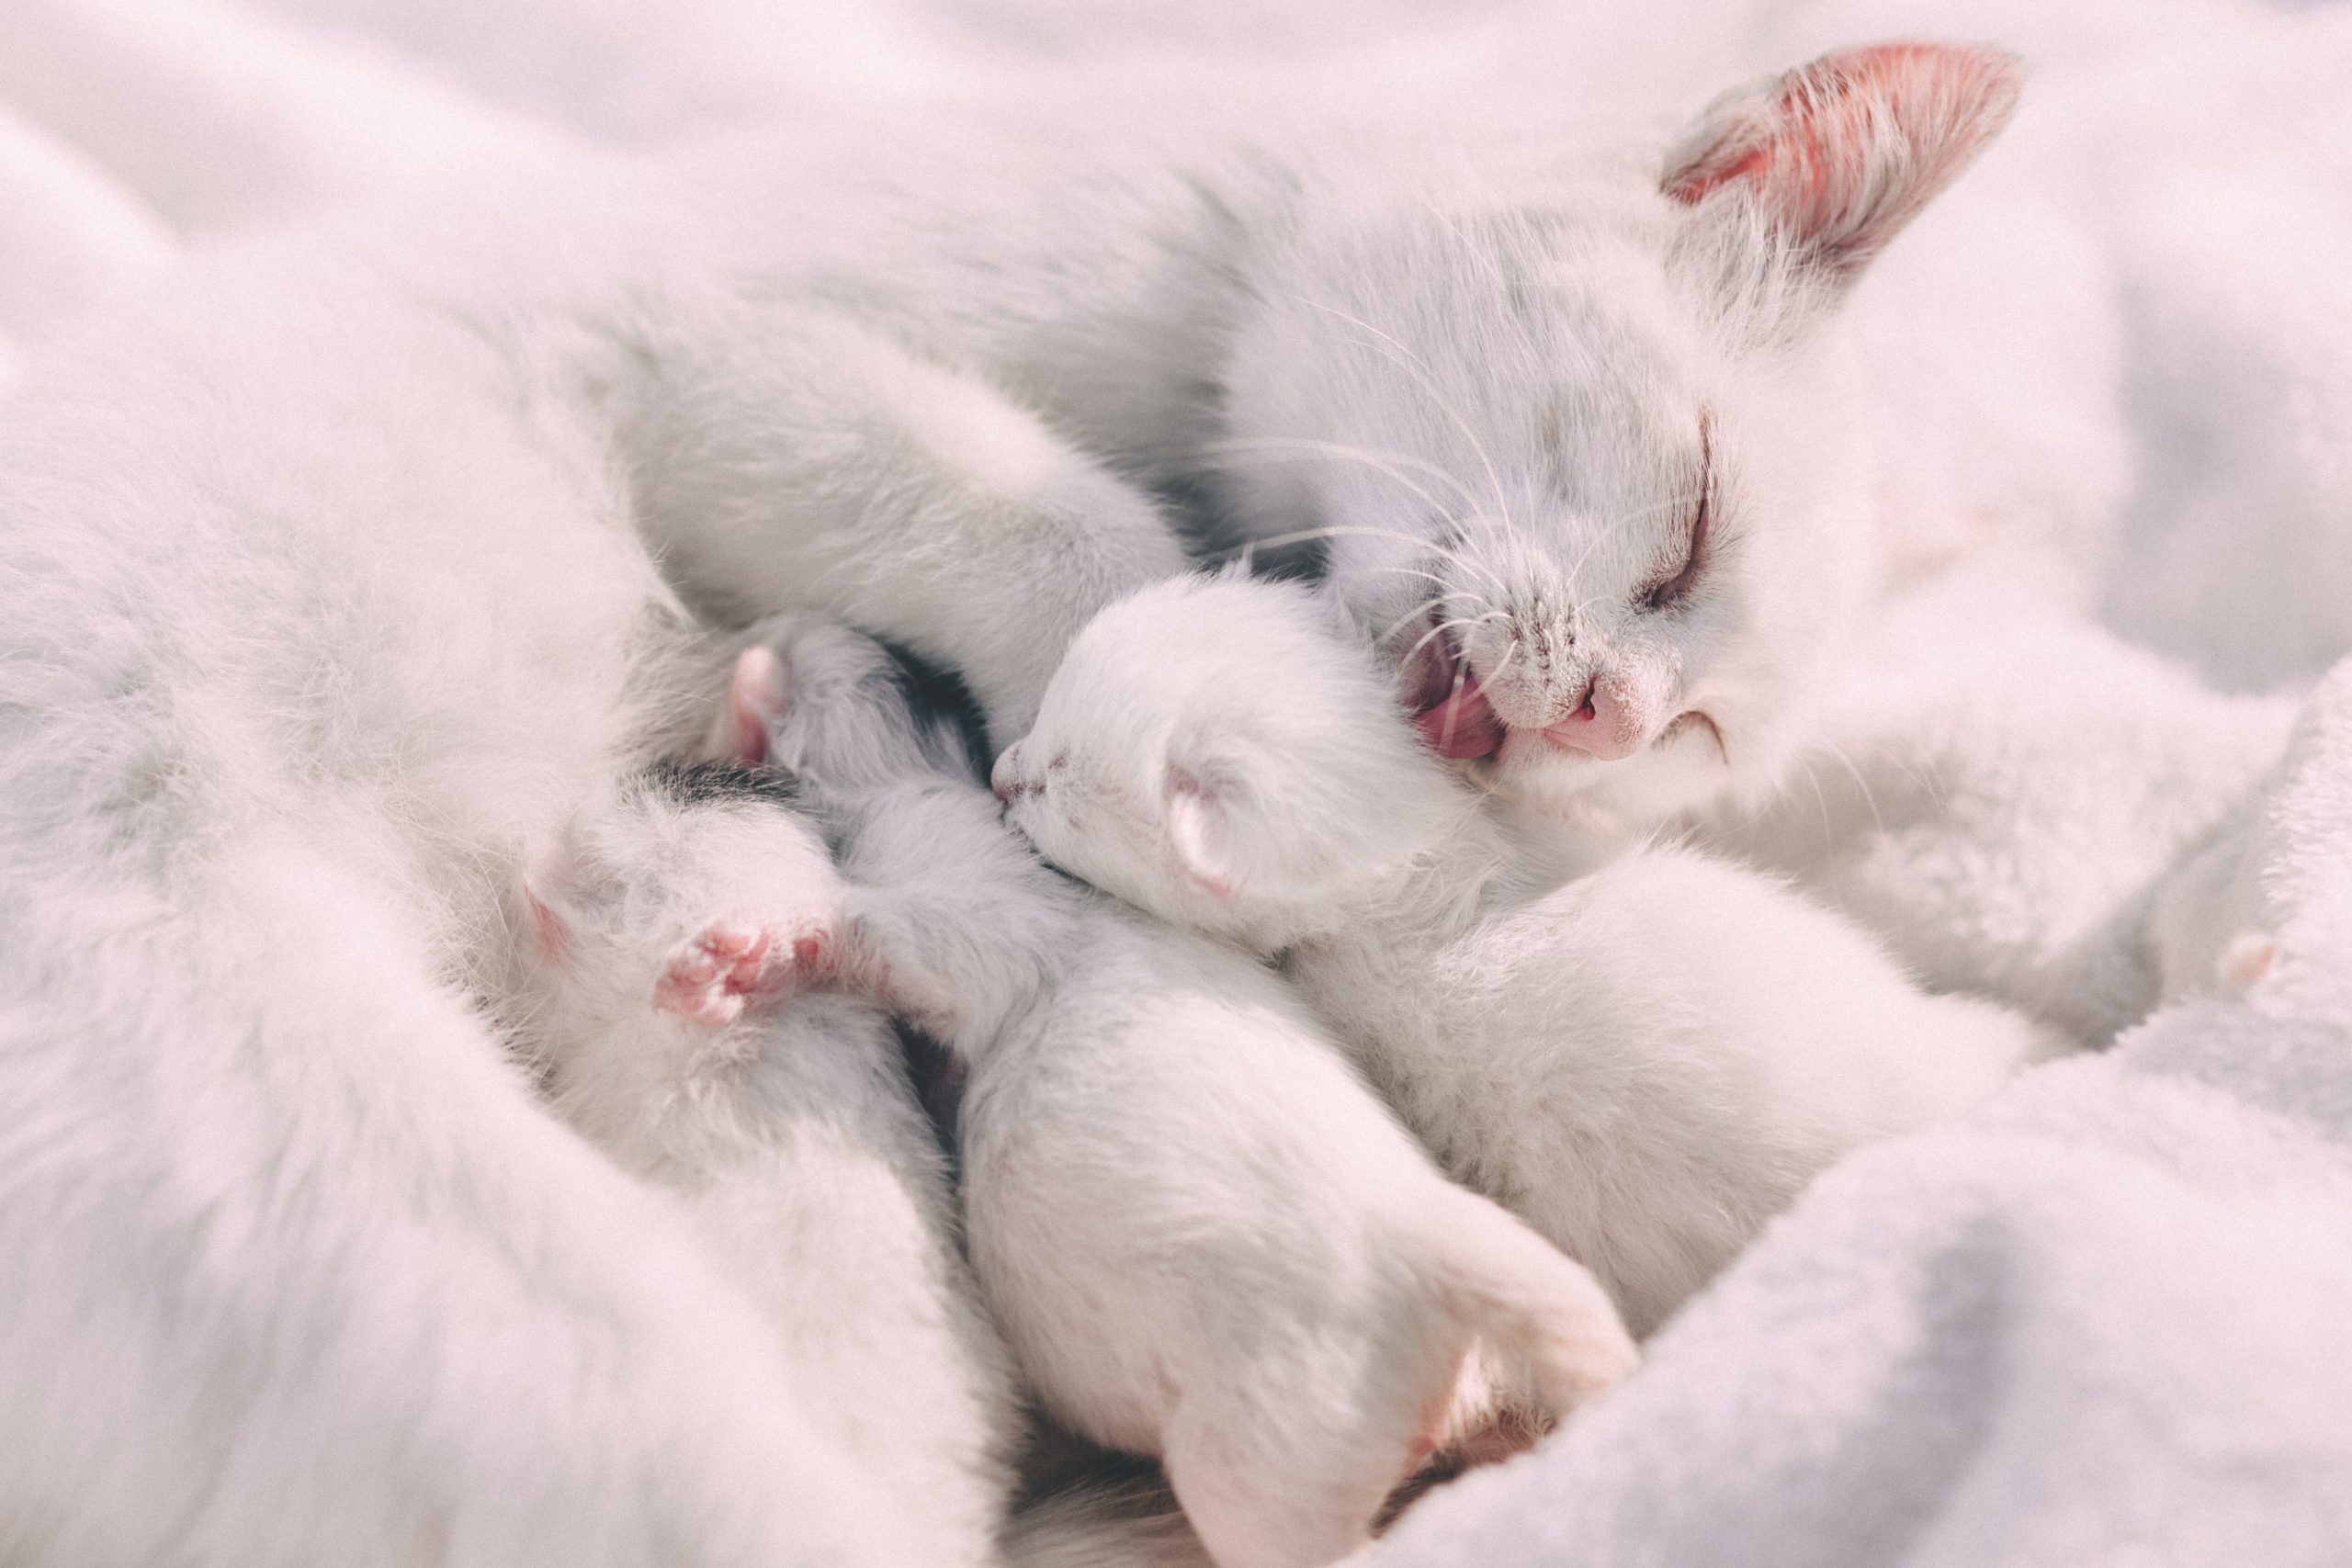 Why do cats eat their kittens?